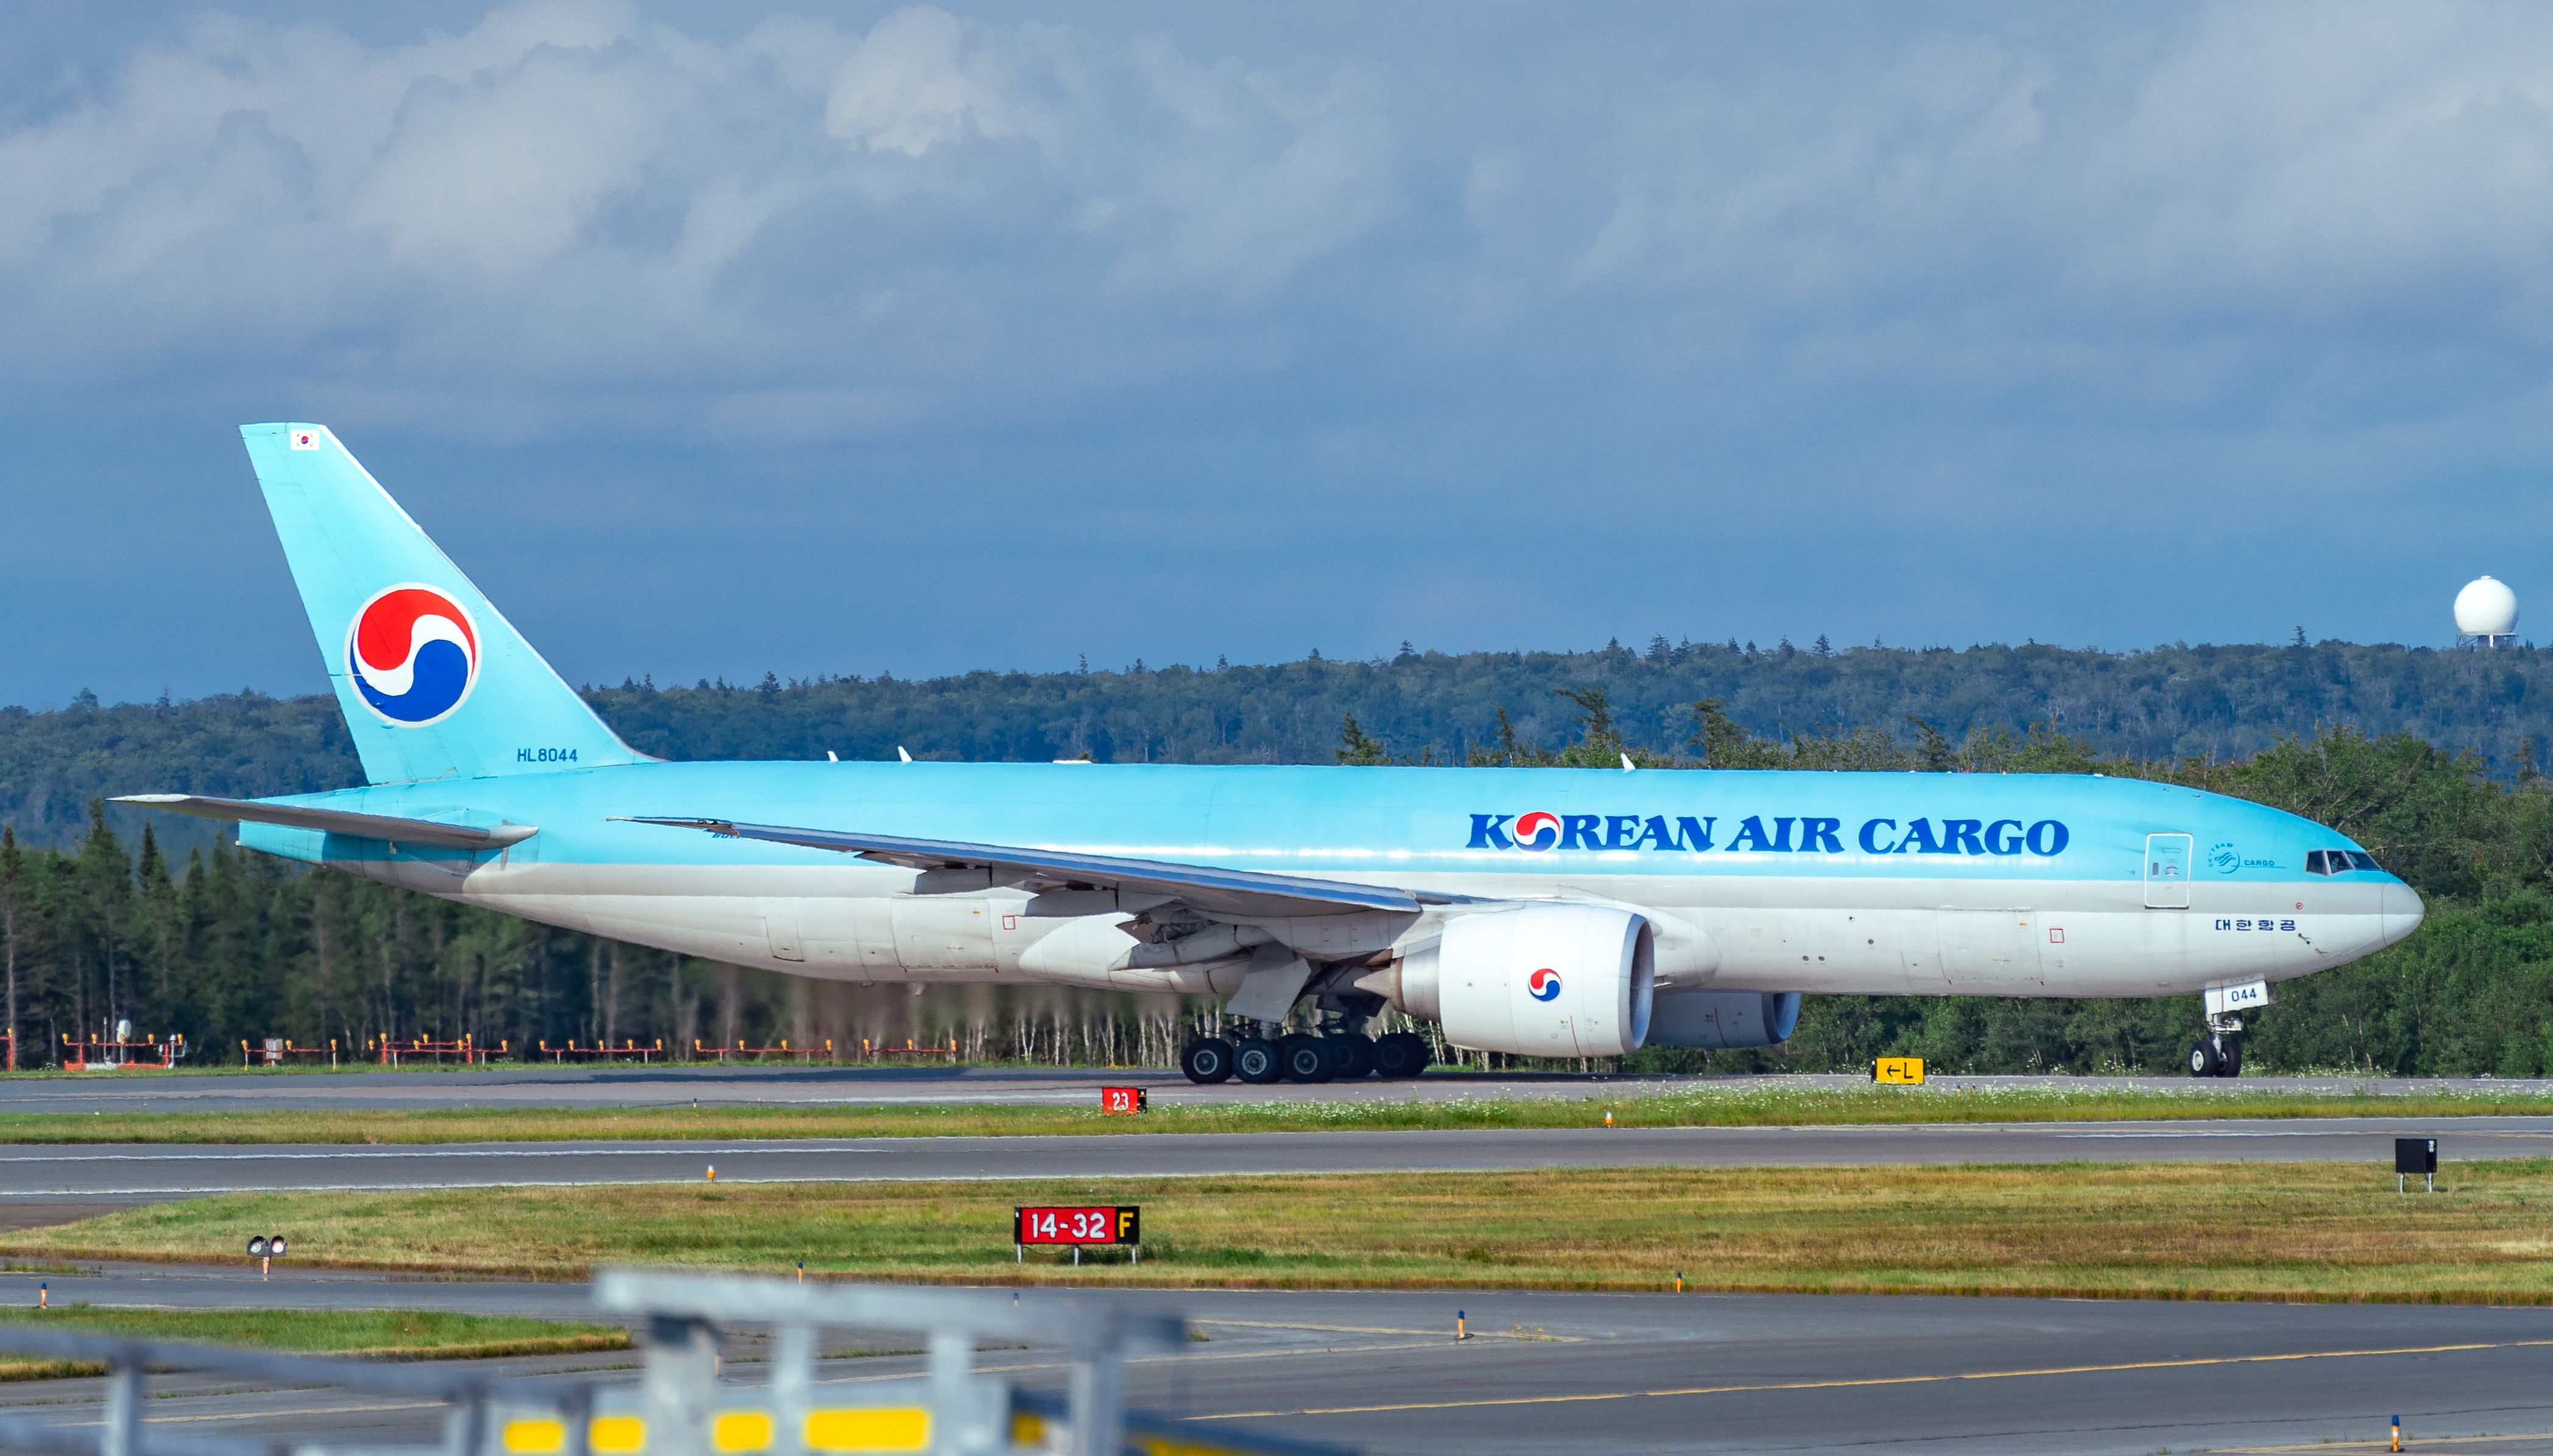 HL8044 — - Korean Air Cargo 777 freighter lining up at Halifax Stanfield.  Shot from the terminal gate area.